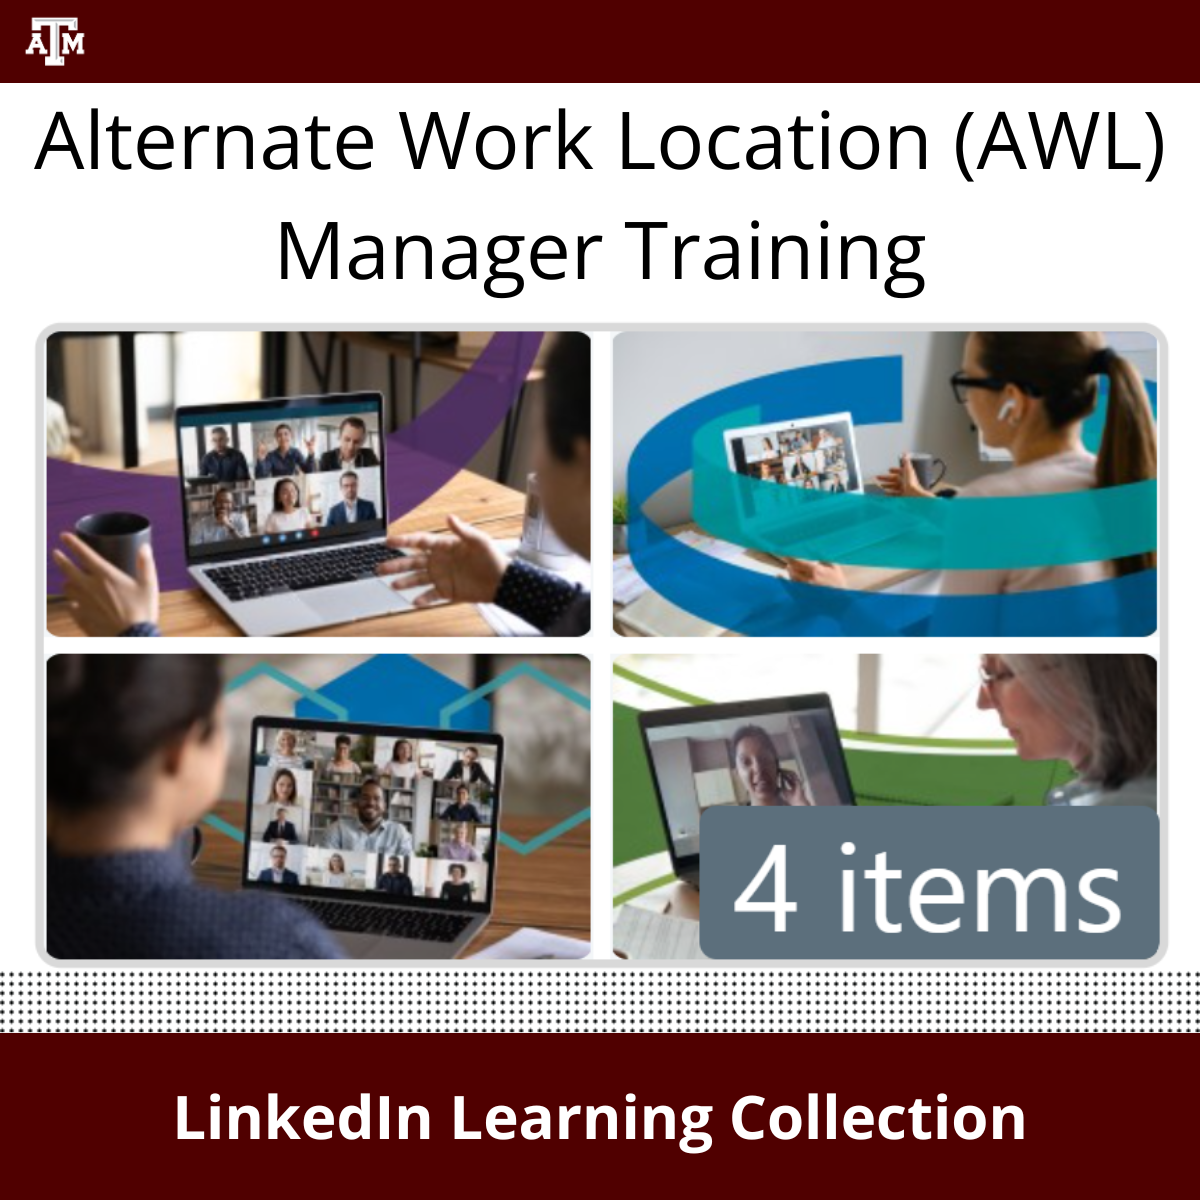 LinkedIn Learning Collection:  AWL - Manager